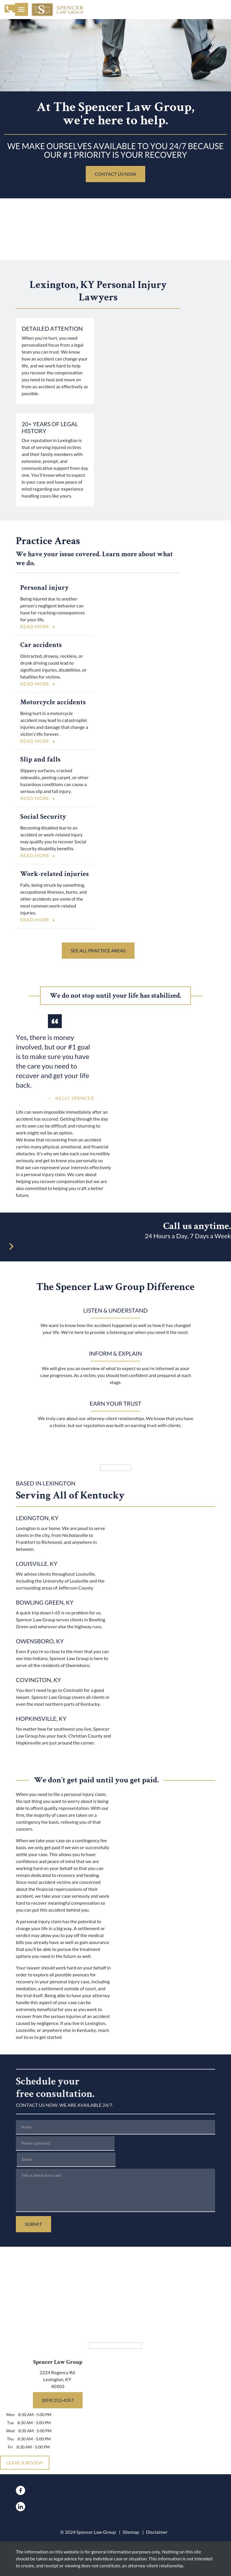 Spencer Kelly P Law Office - Lexington KY Lawyers